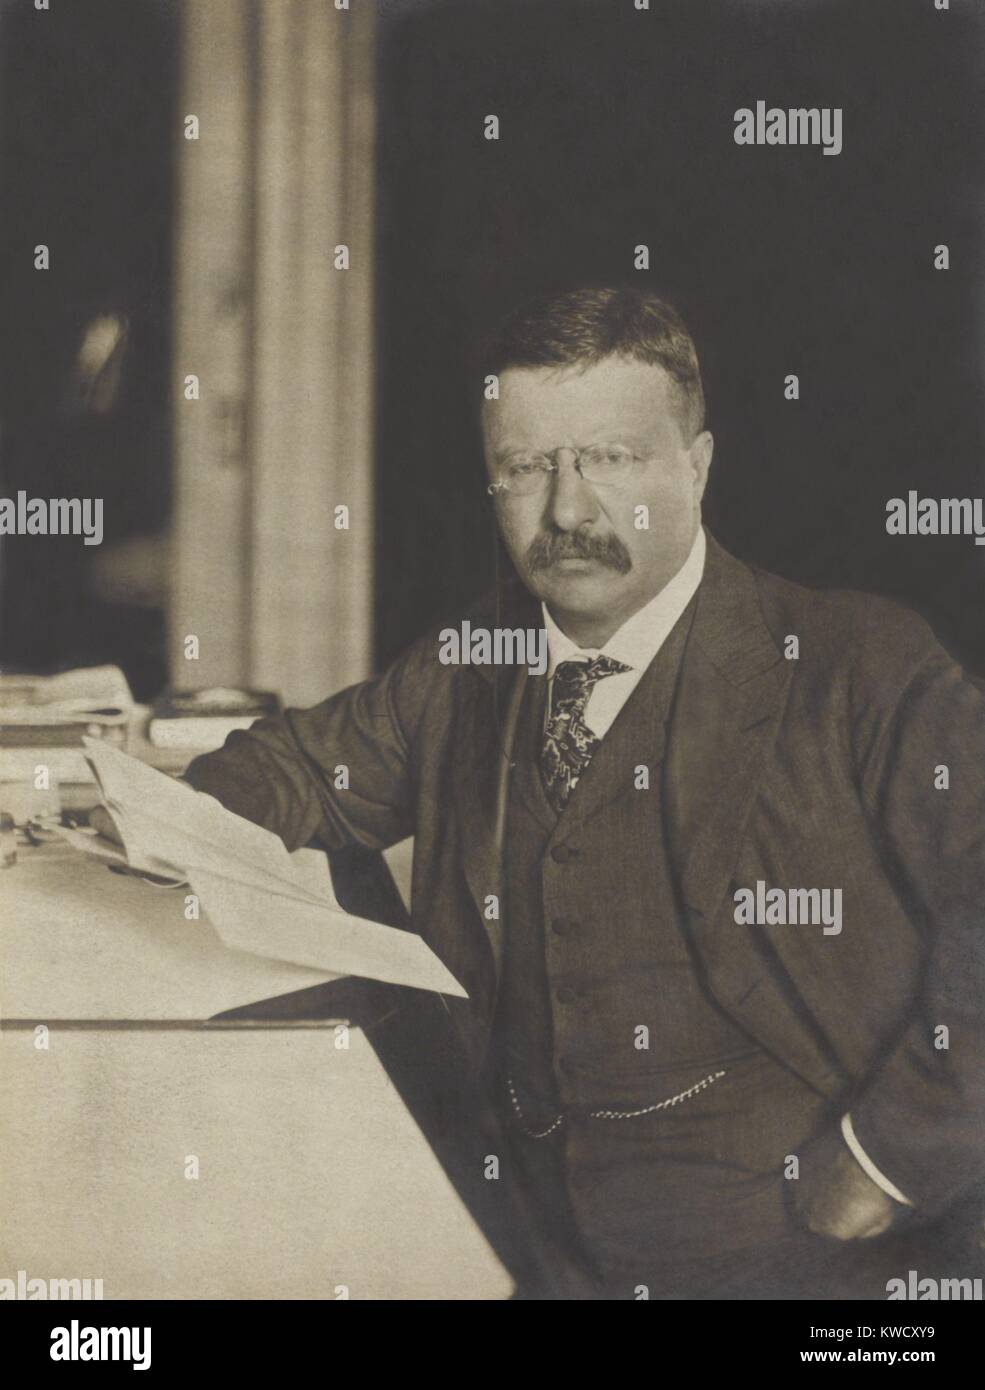 President Theodore Roosevelt, seated at his desk, holding papers, 1904 (BSLOC 2017 4 59) Stock Photo